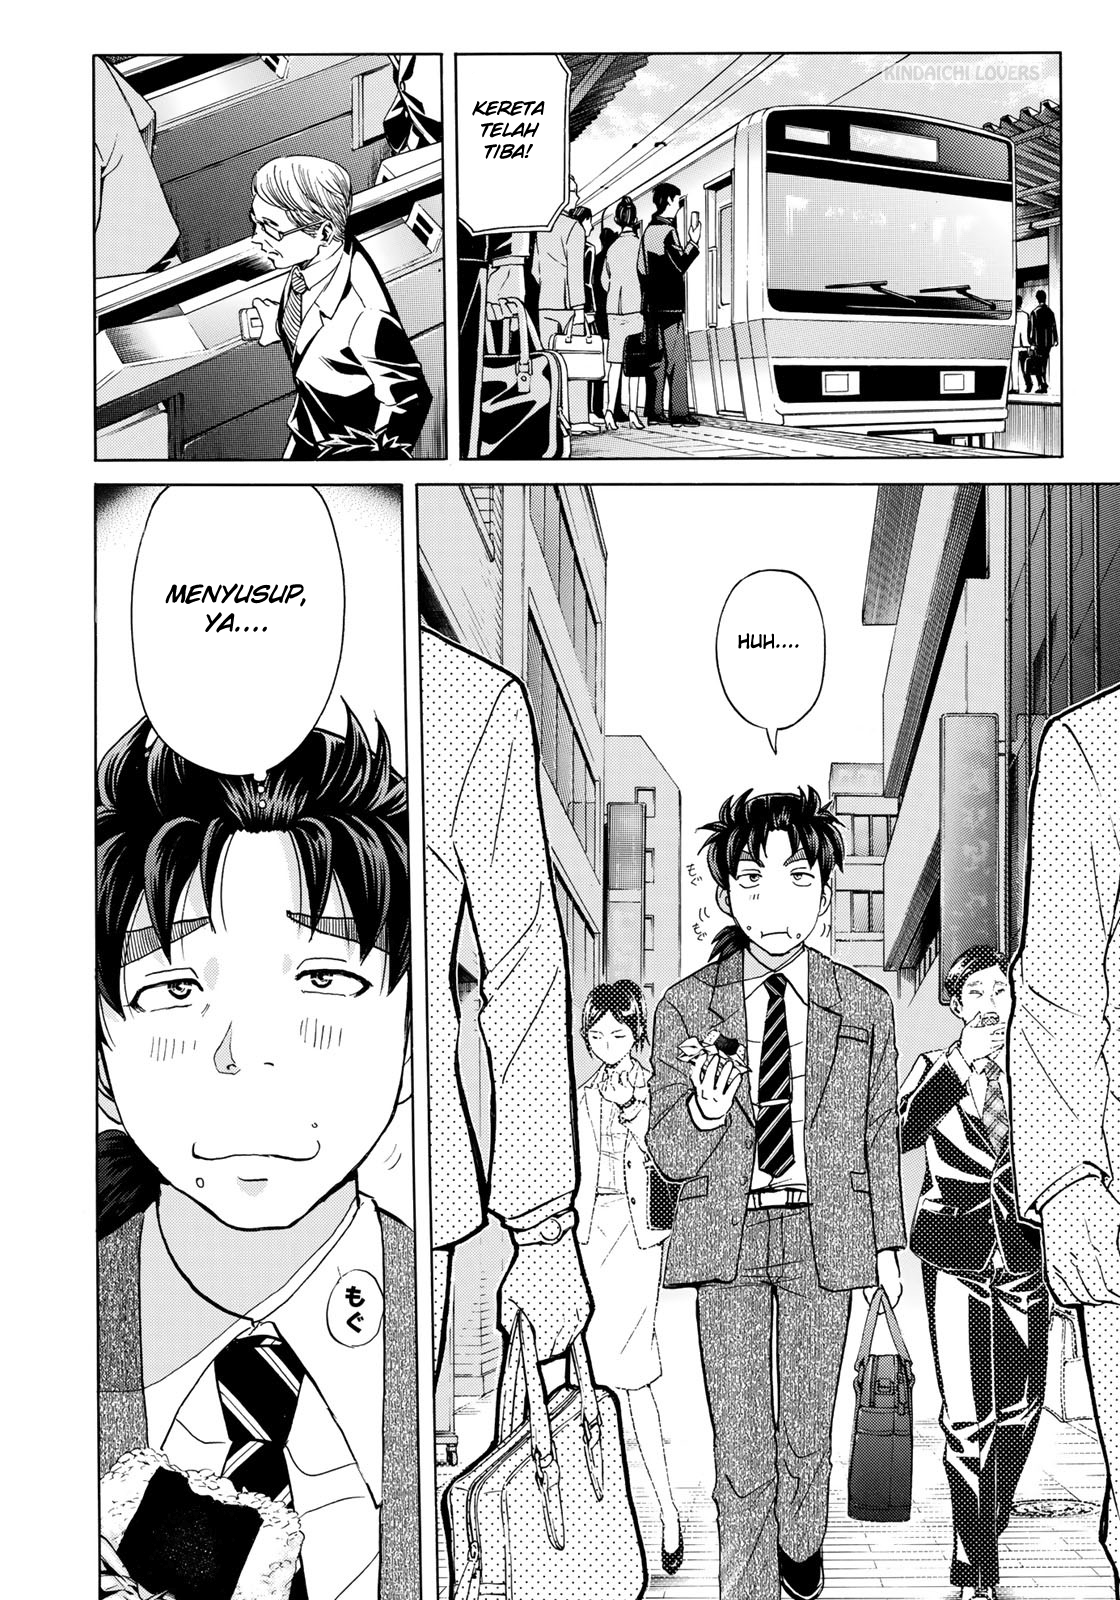 37 Year Old Kindaichi Case Files Chapter 1